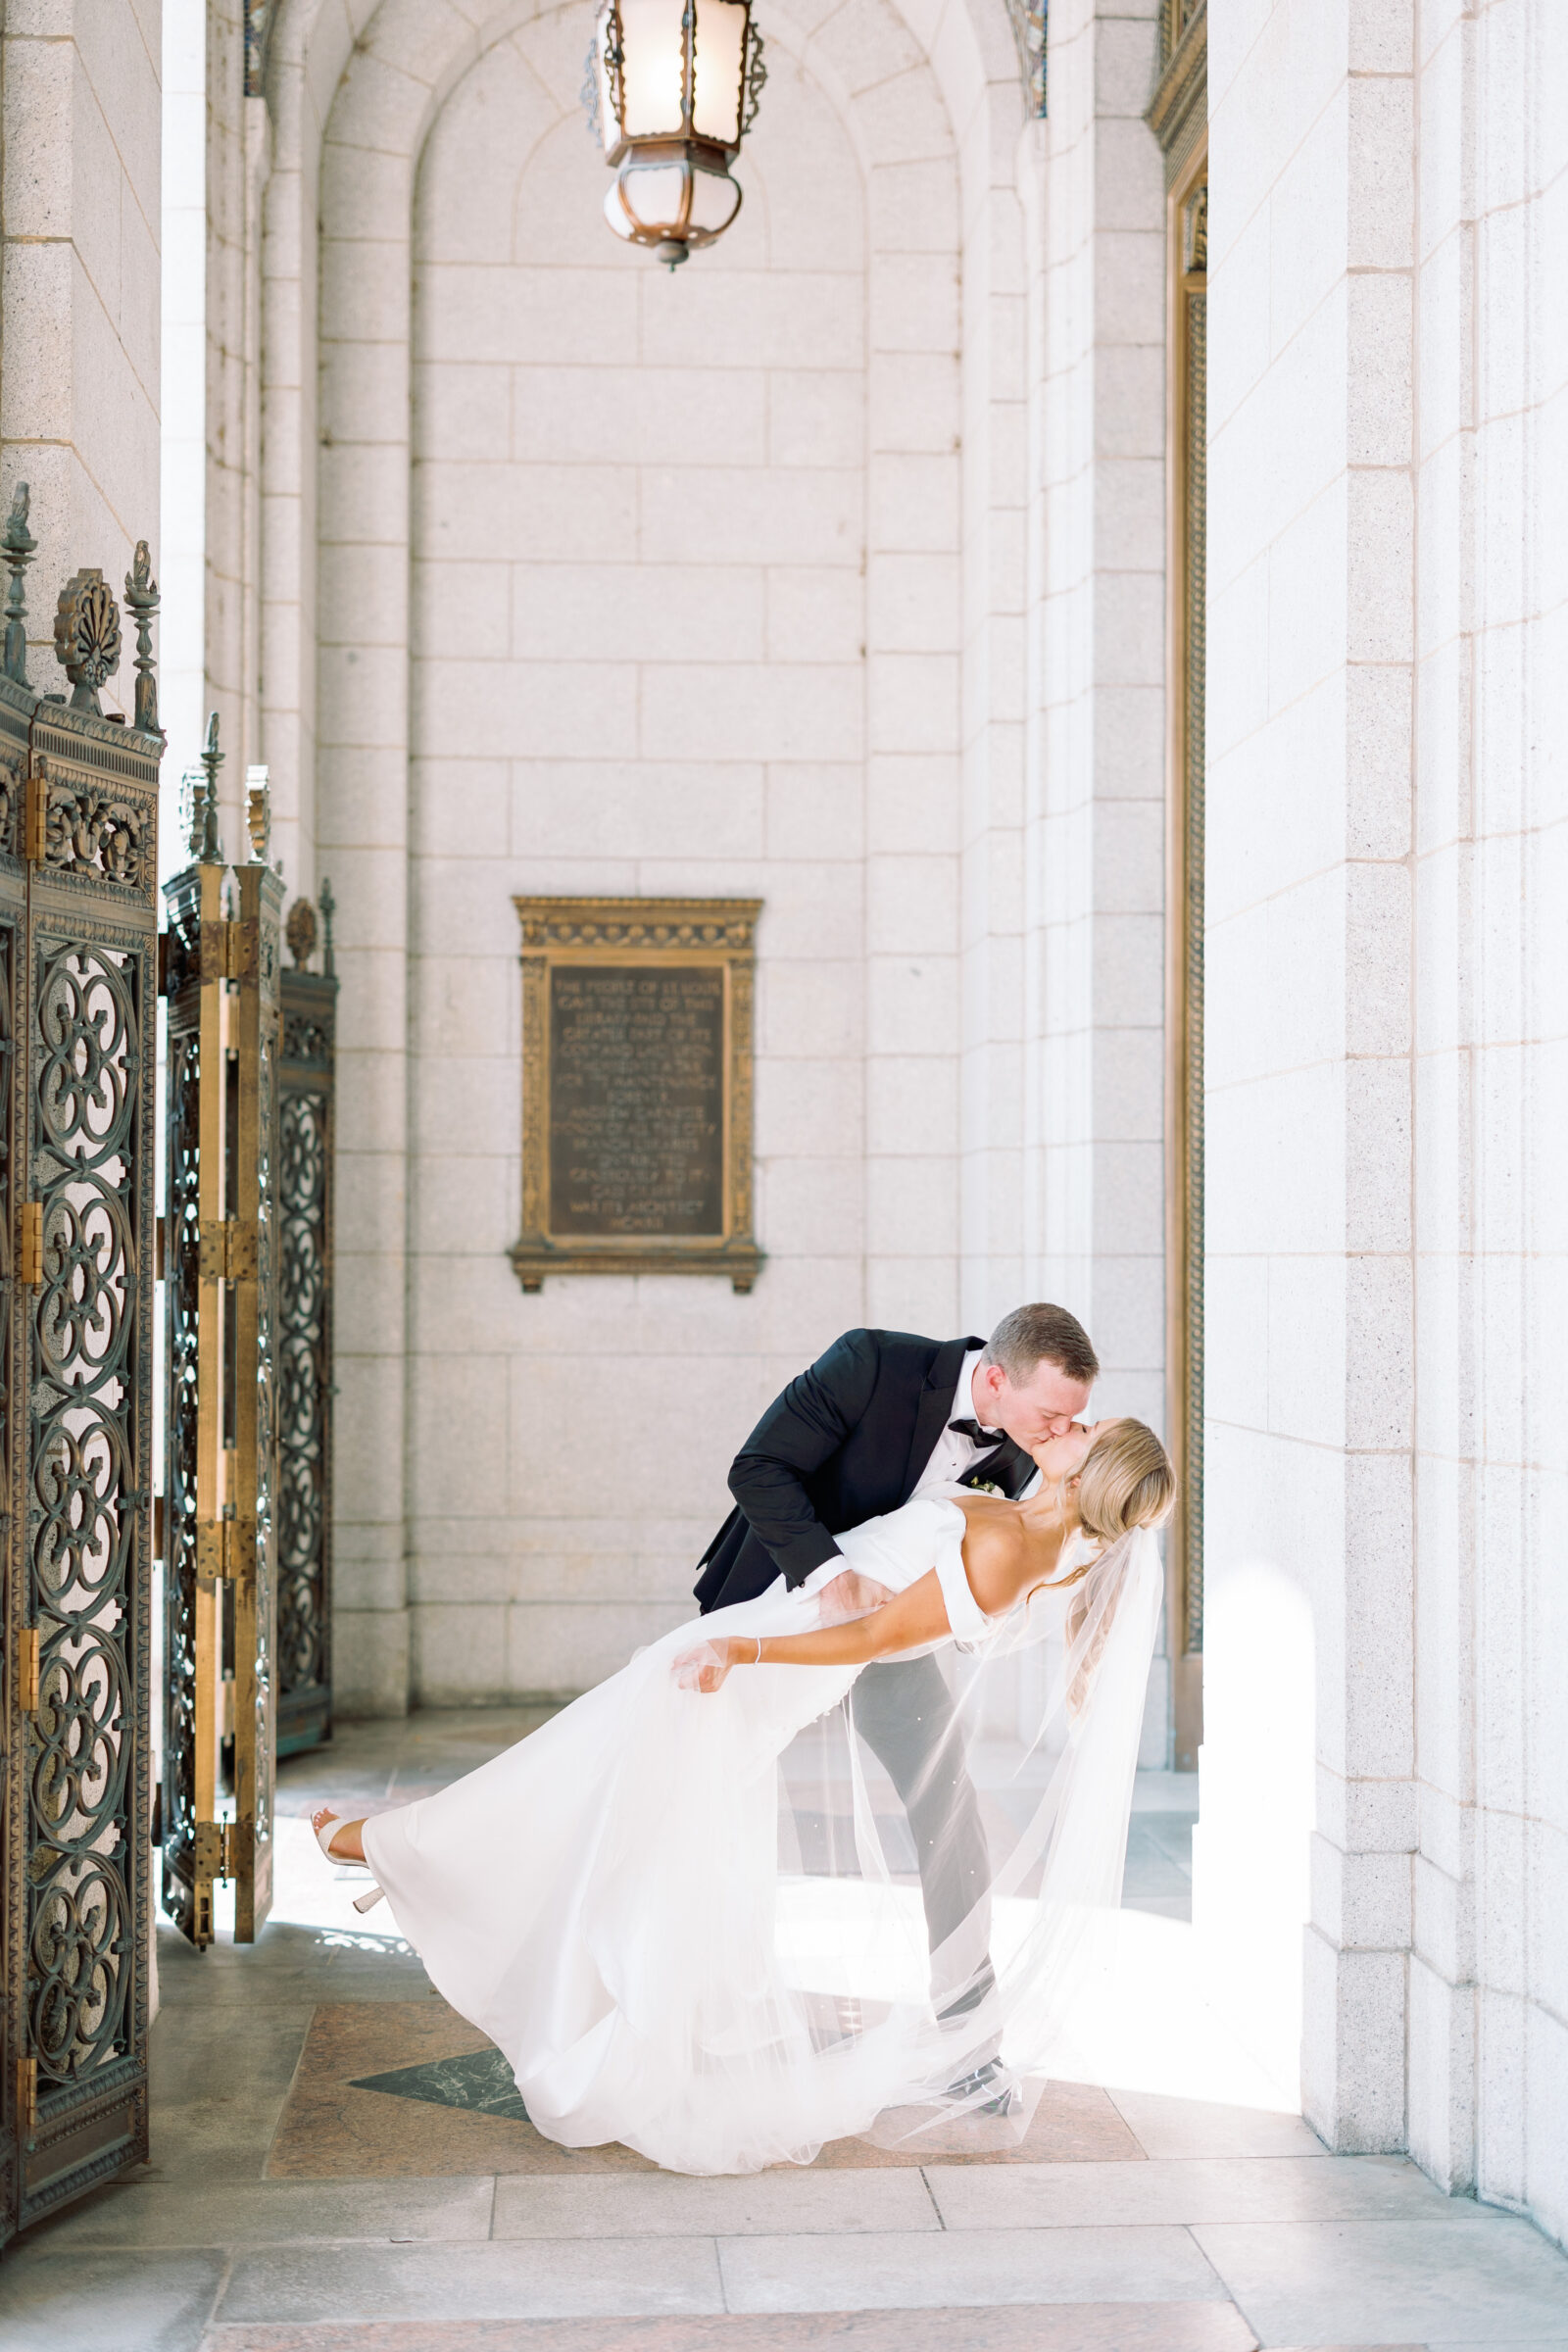 St Louis Central Library Wedding Day photography